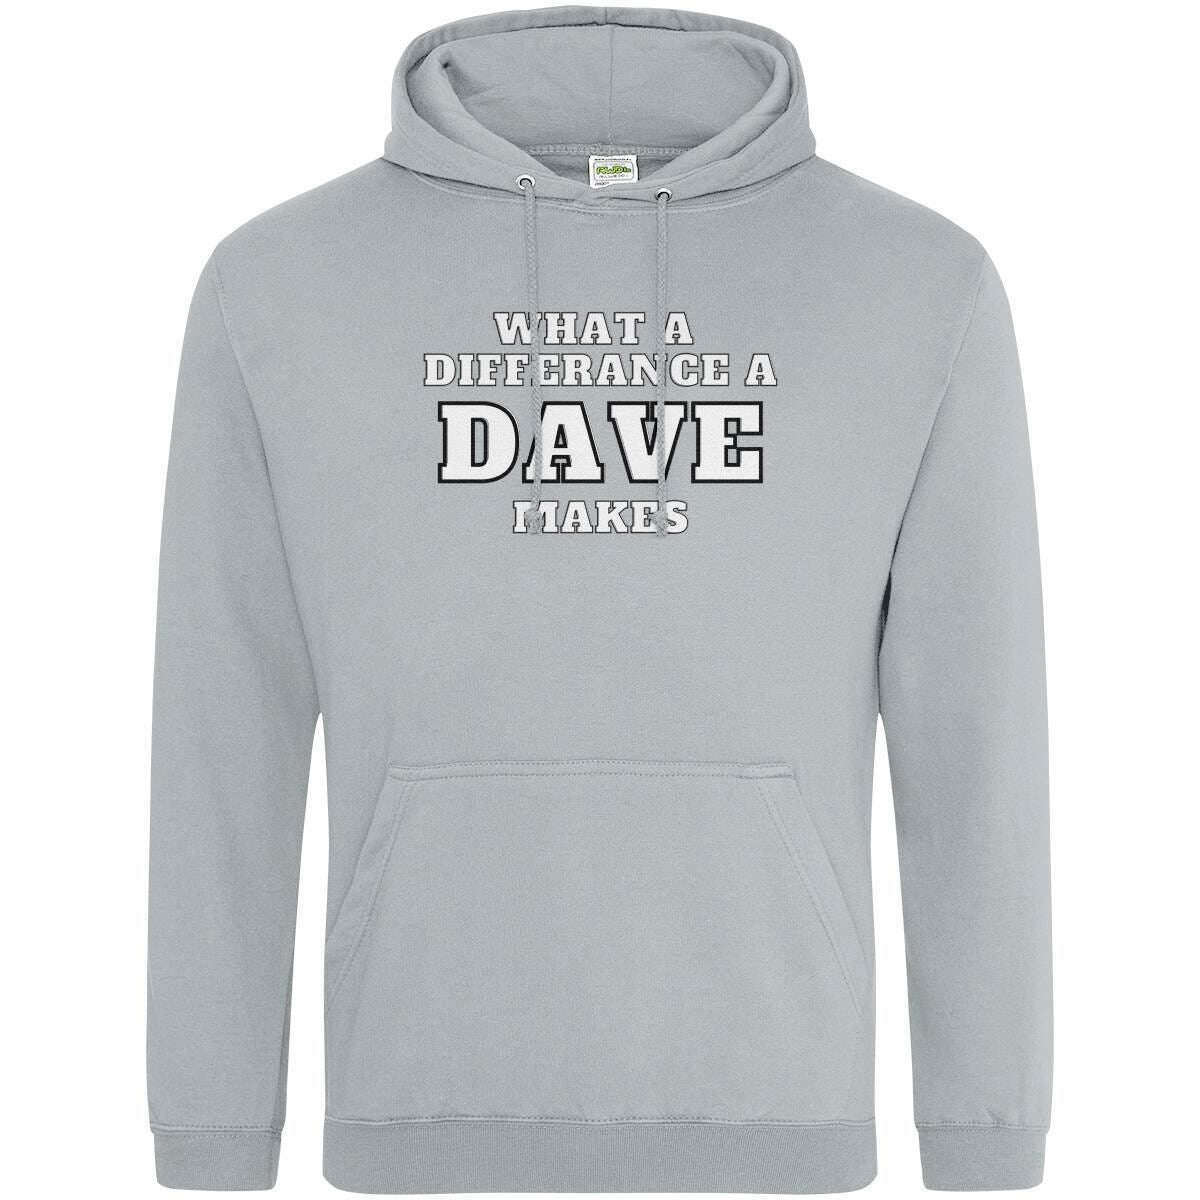 Teemarkable! What A Difference a Dave Makes Hoodie